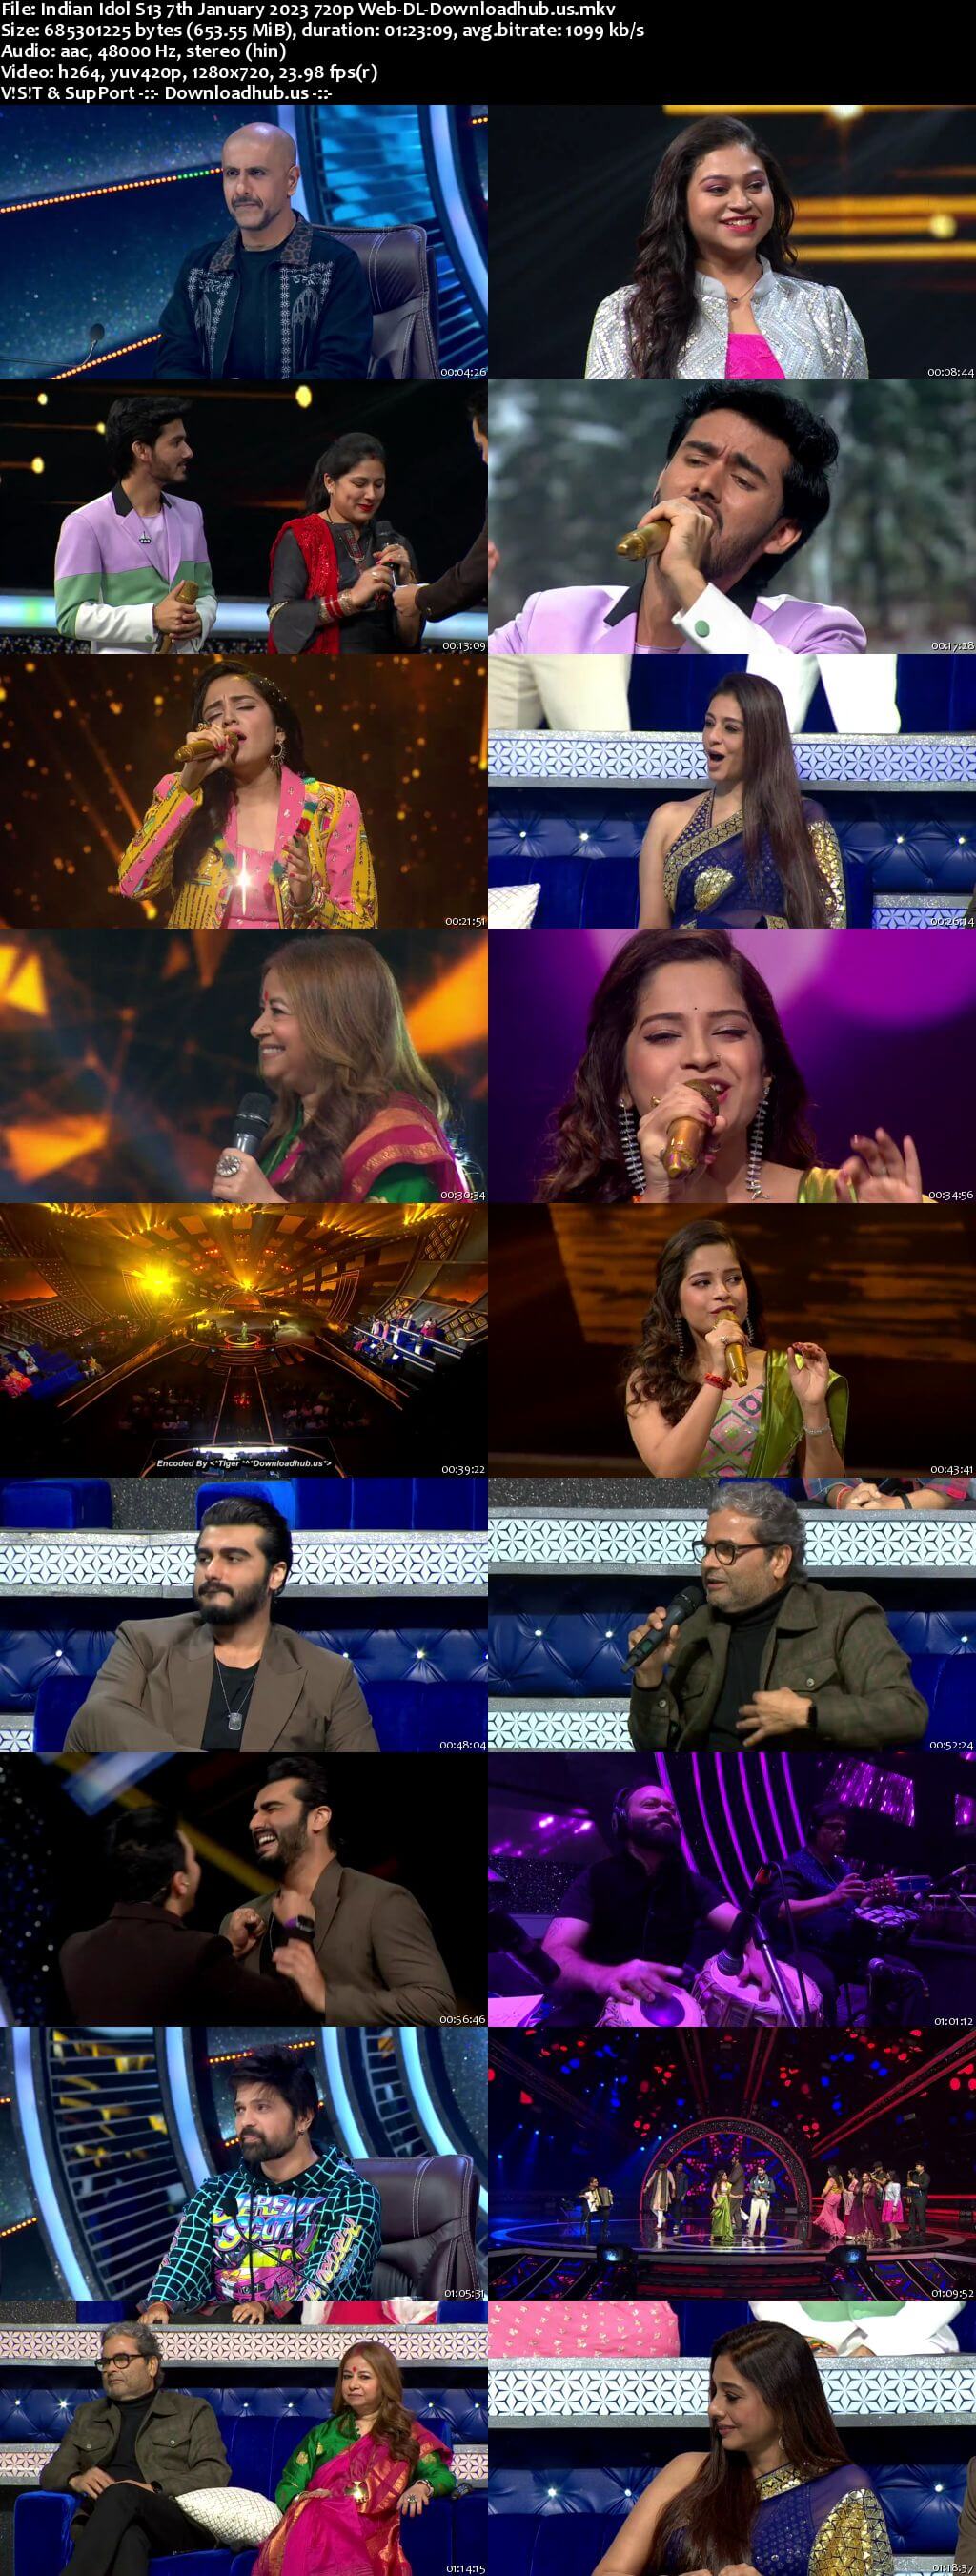 Indian Idol S13 07 January 2023 Episode 35 Web-DL 720p 480p